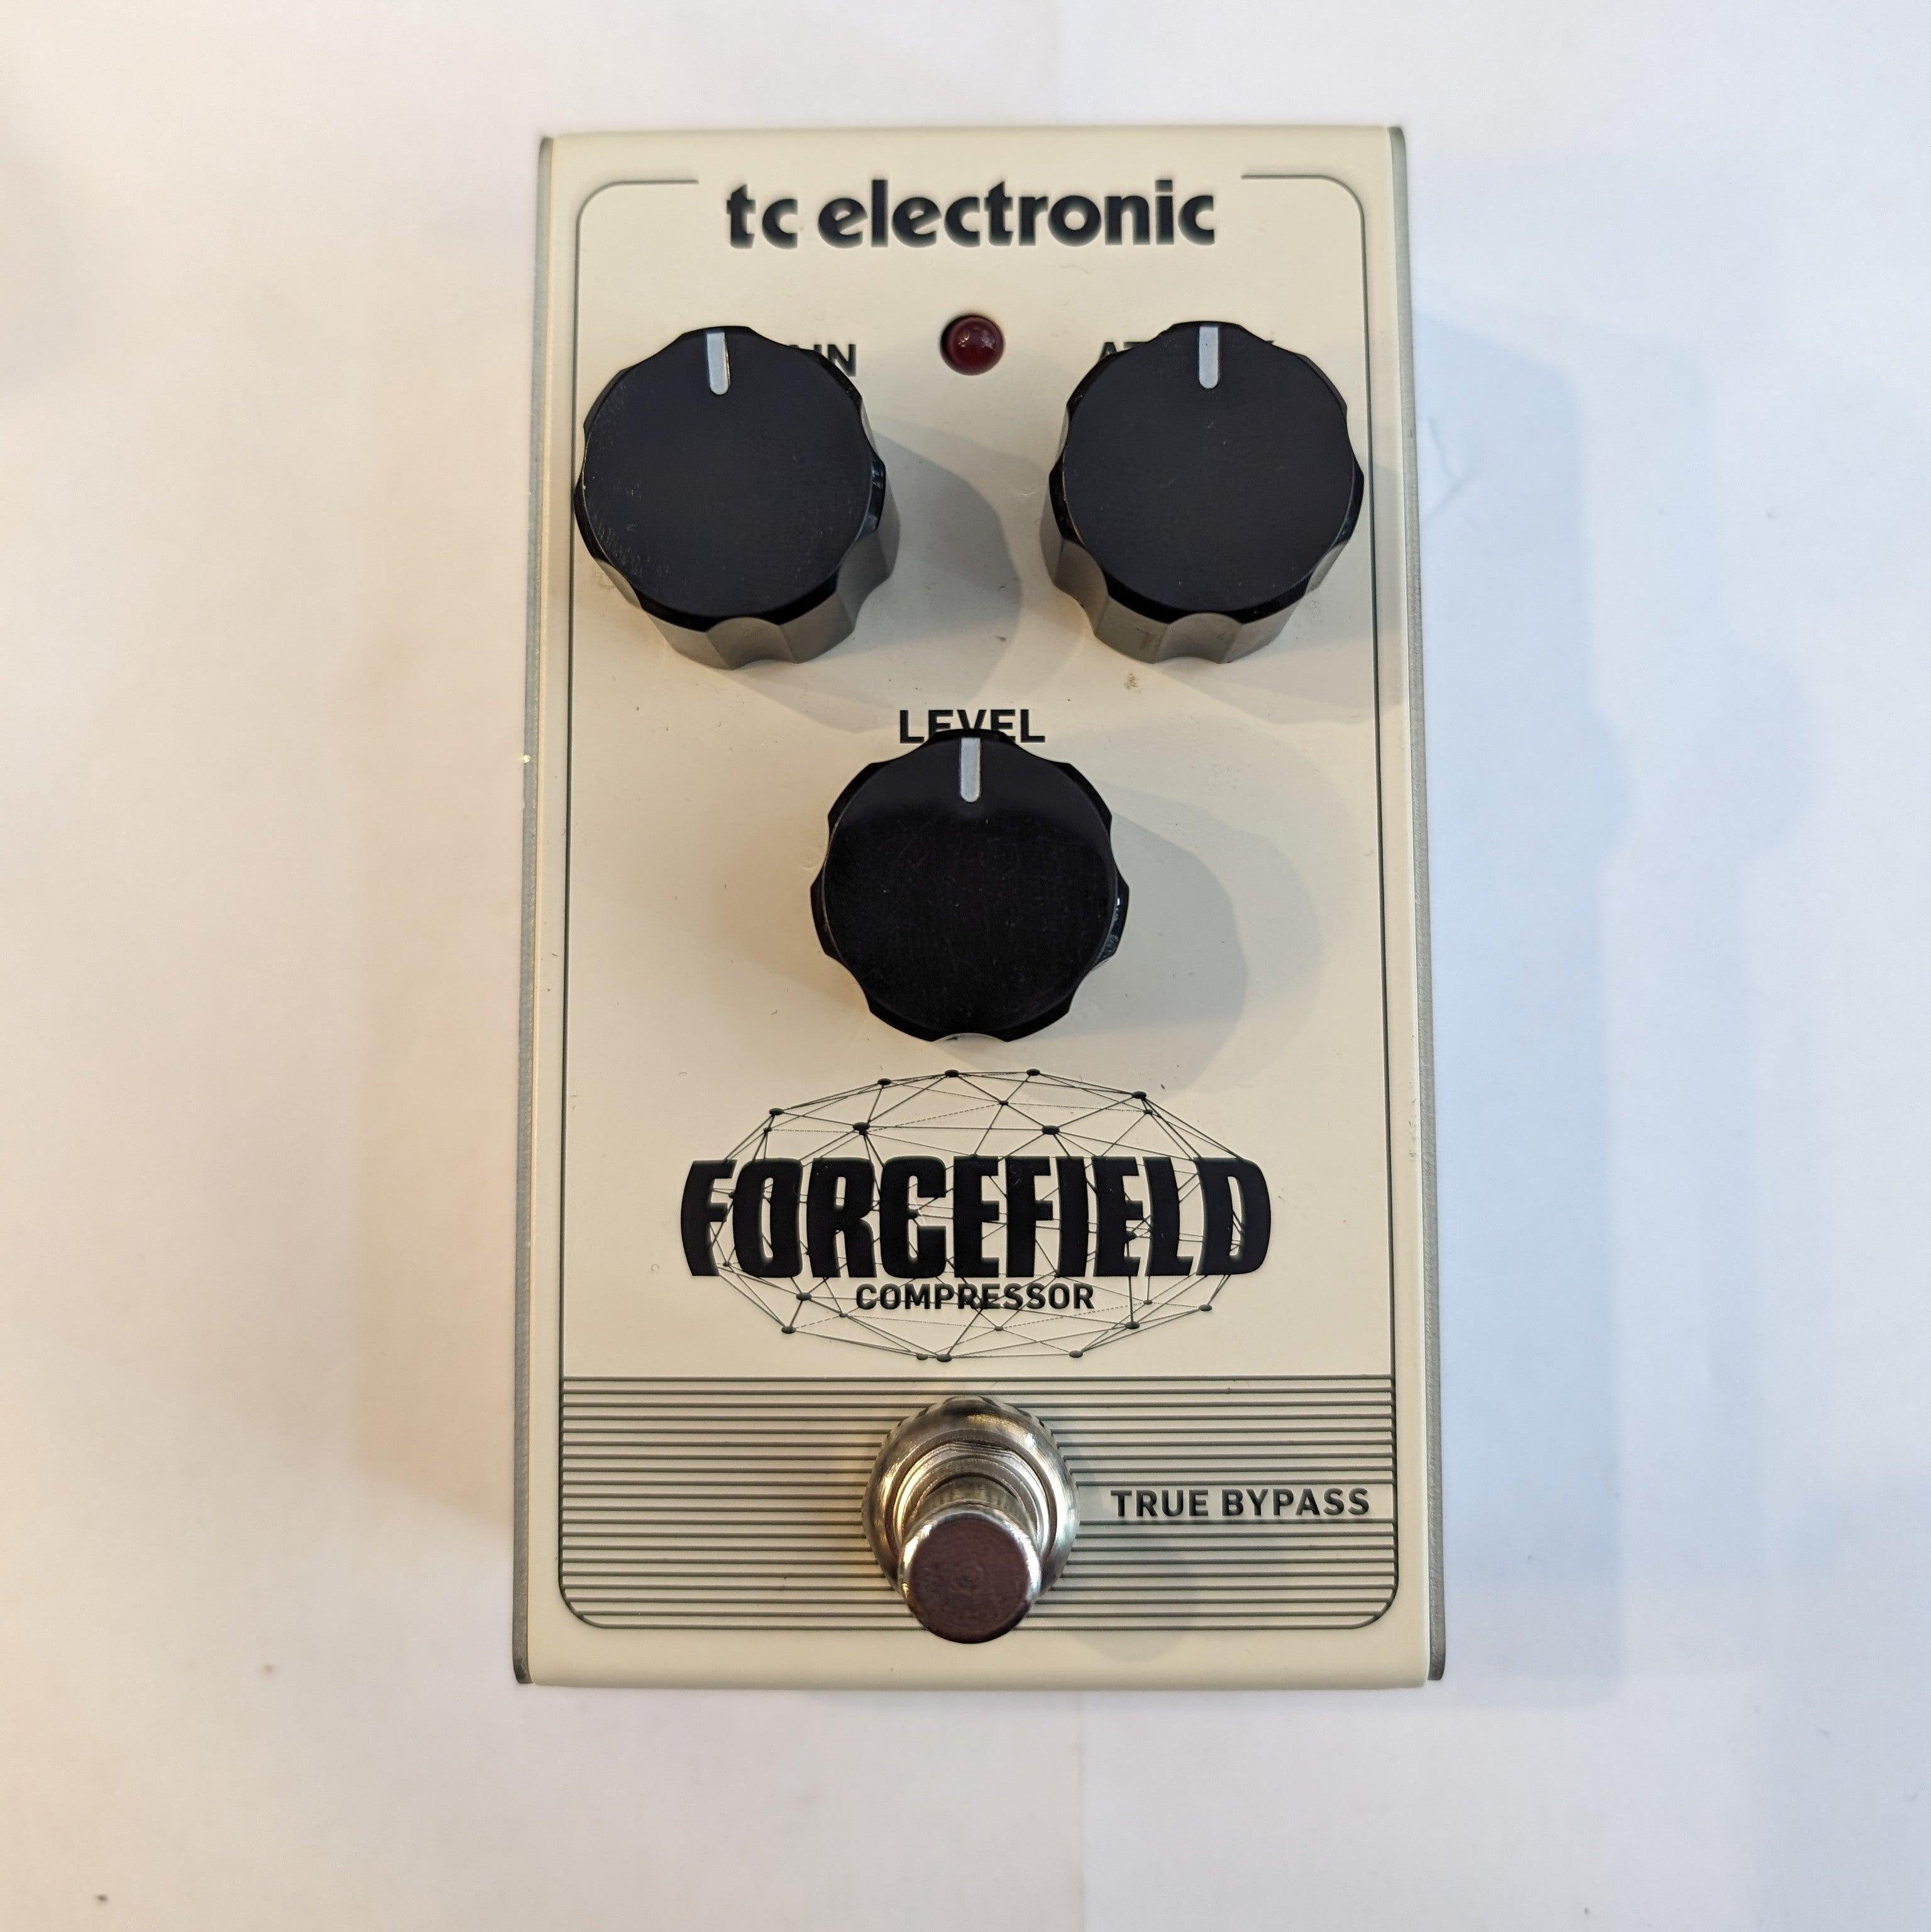 Secondhand TC Forcefield Compressor - Muso's Stuff